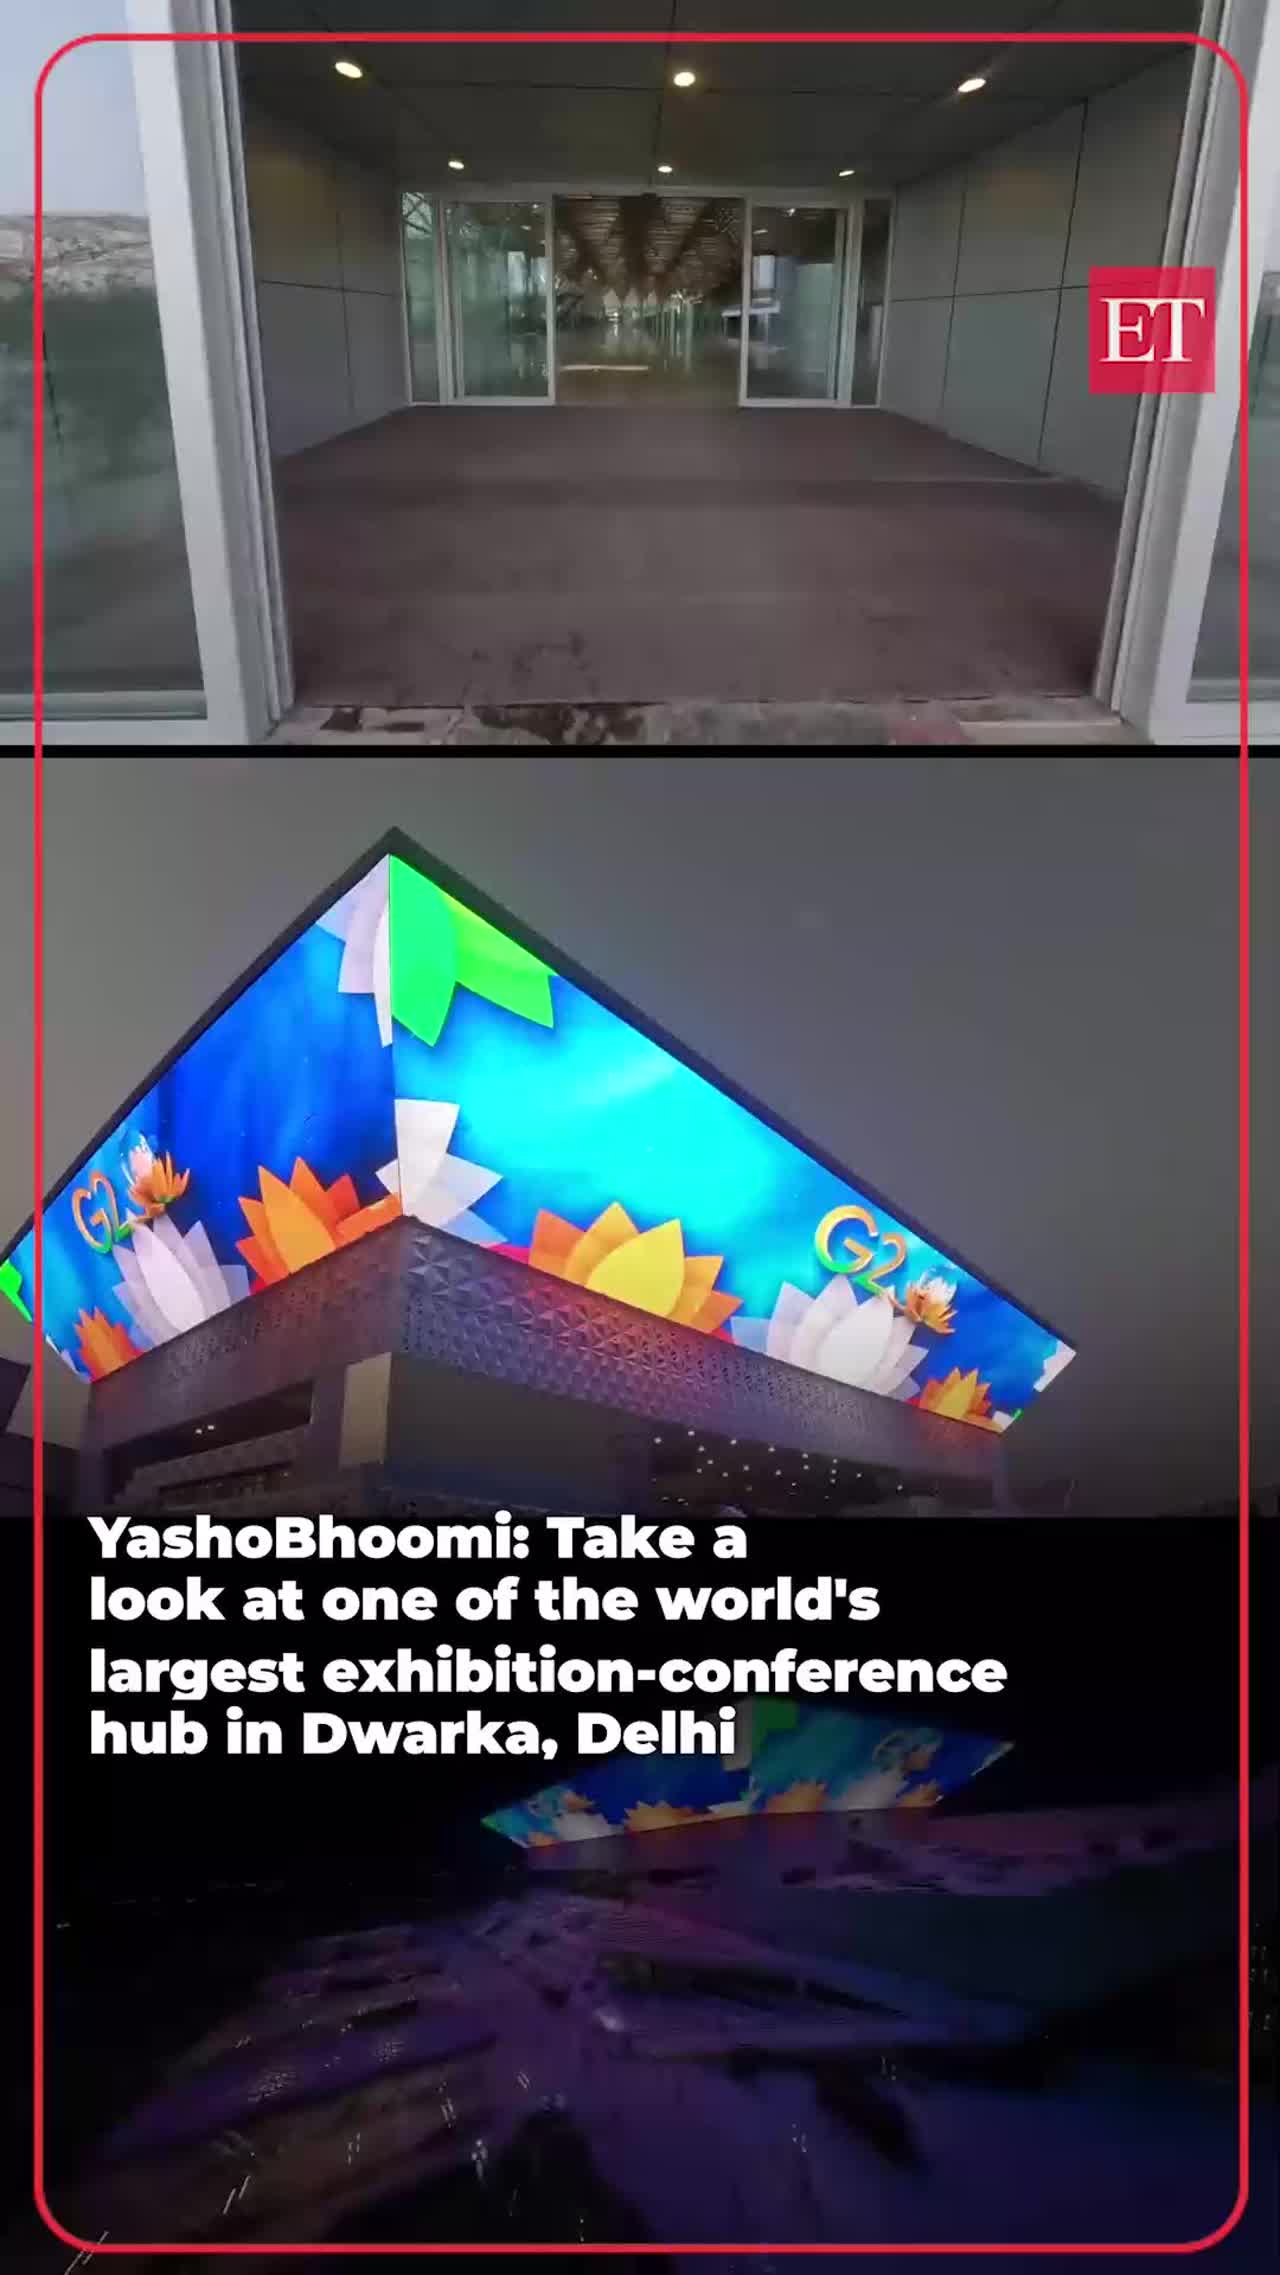 YashoBhoomi: Take a look at one of the world's largest exhibition-conference hub in Dwarka